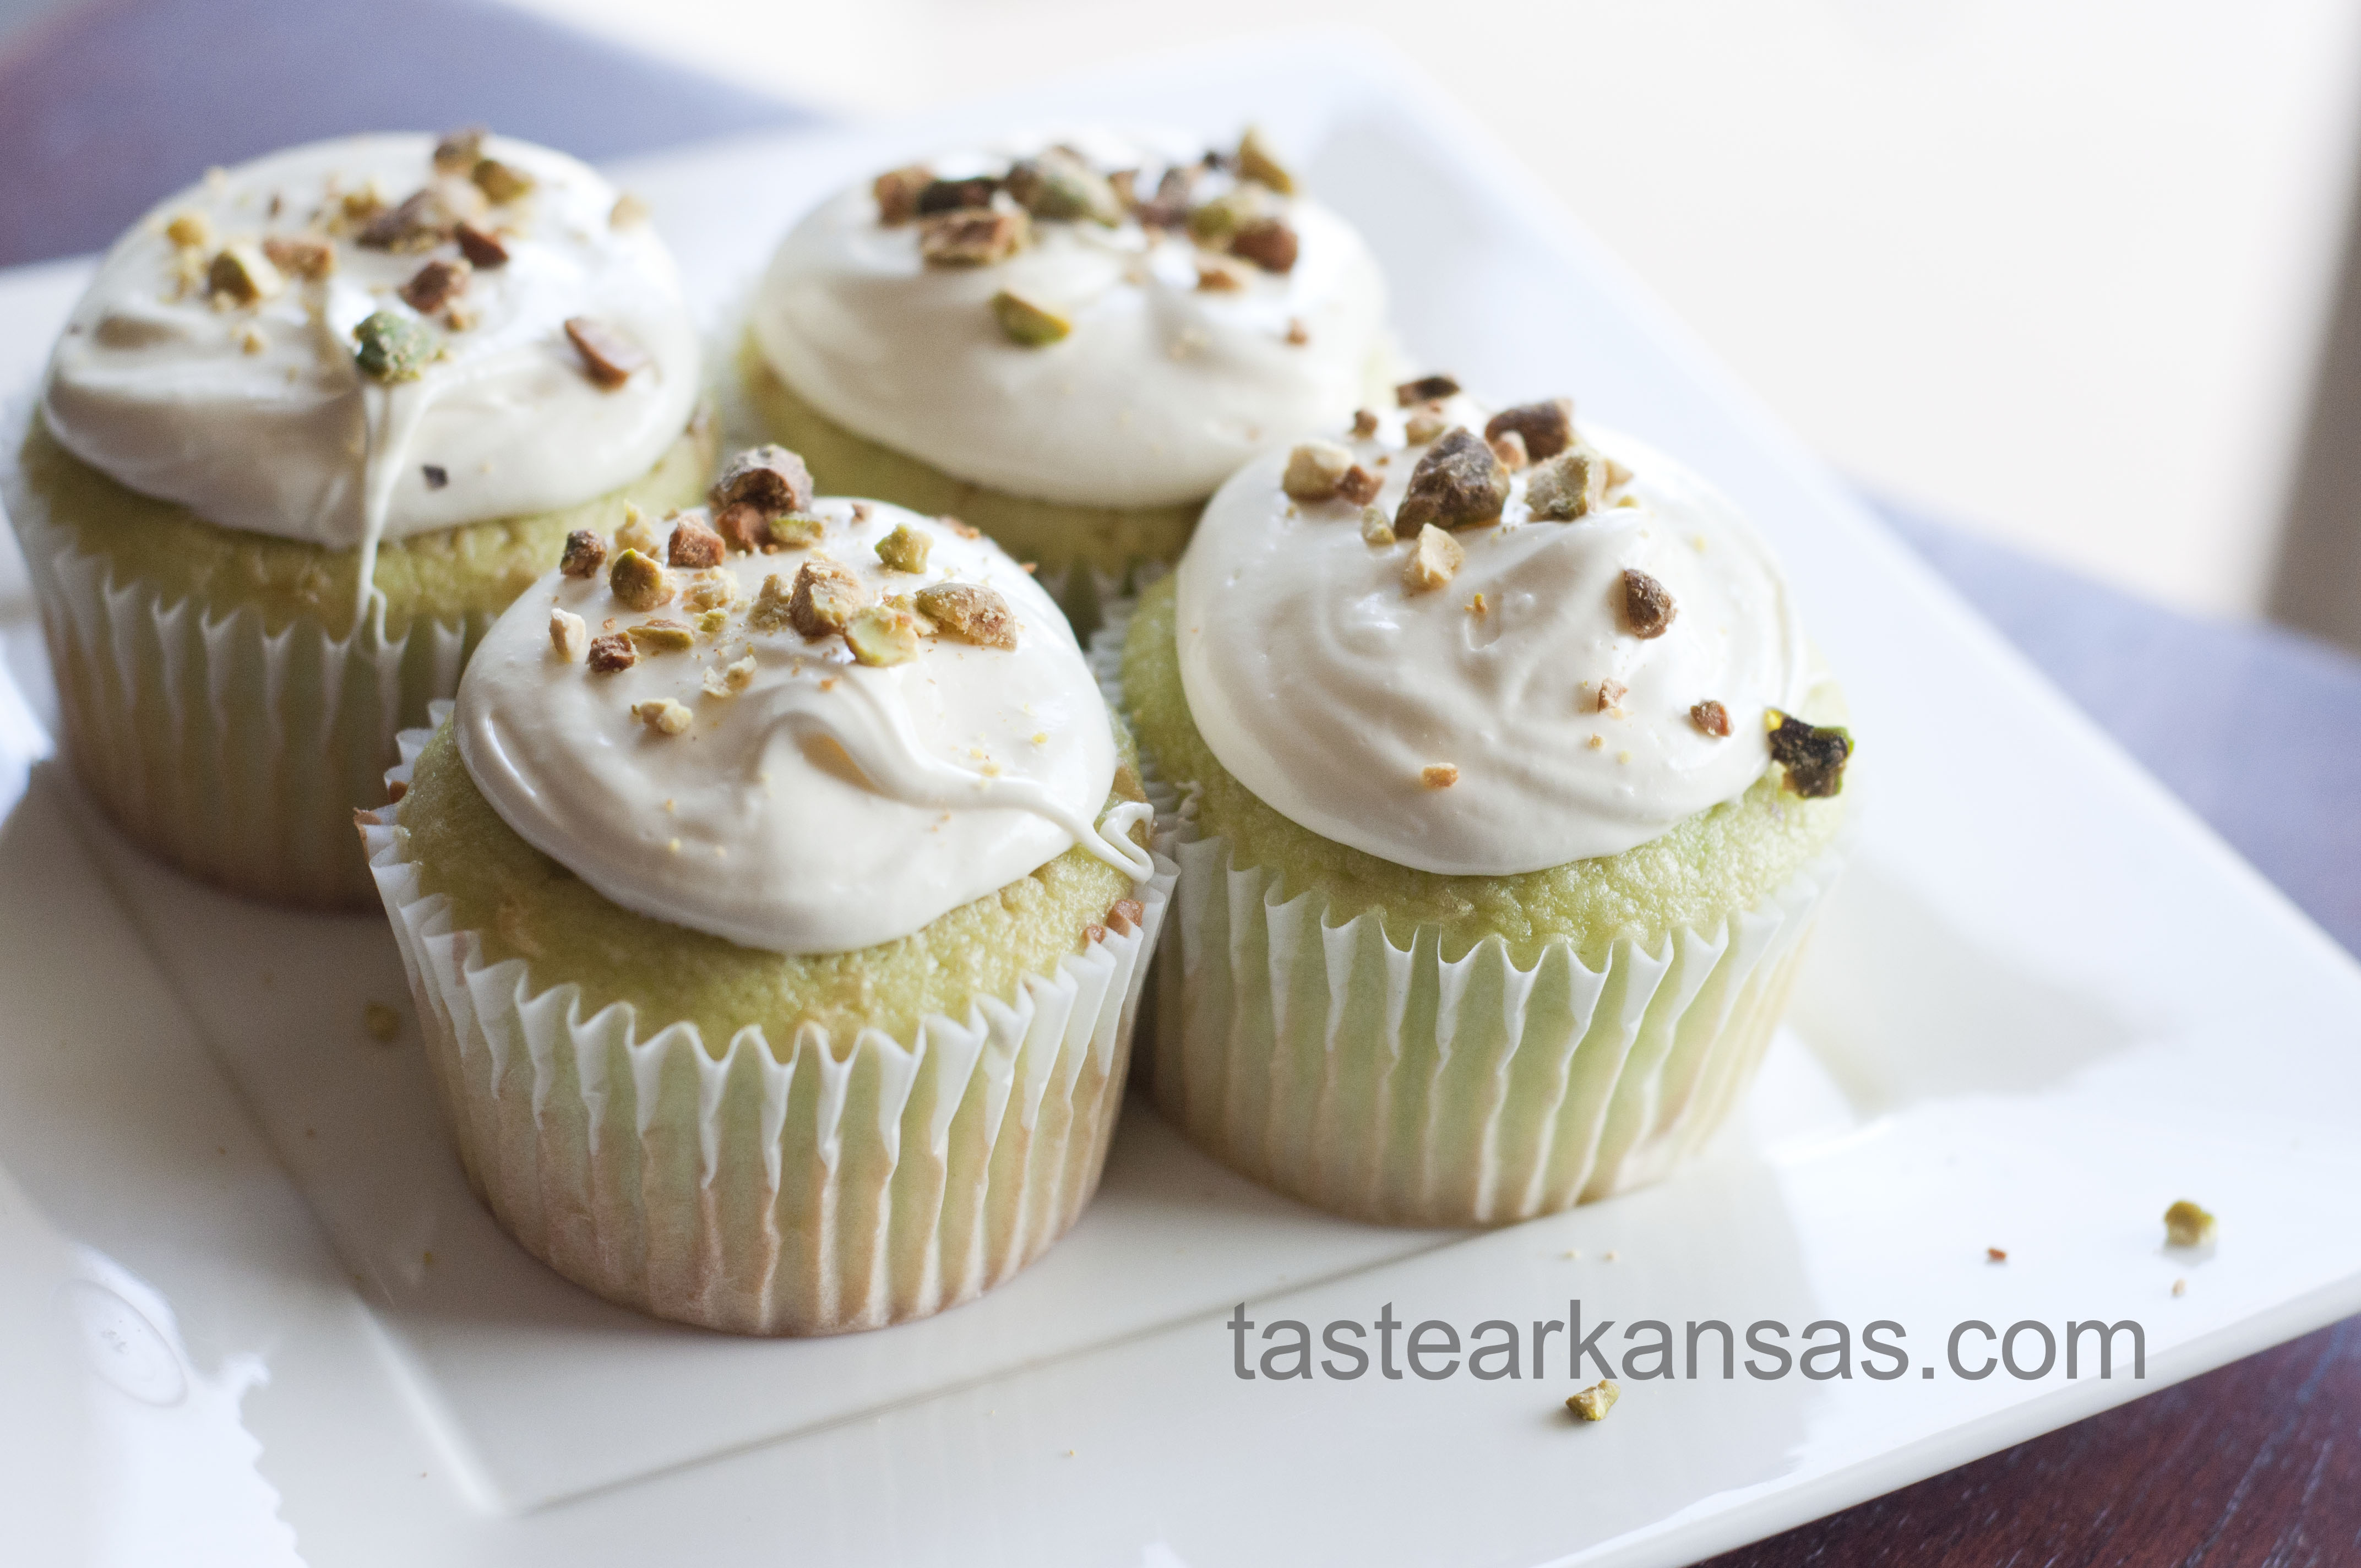 This image is of St. Patrick's Day Pistachio Cupcakes on a white plate